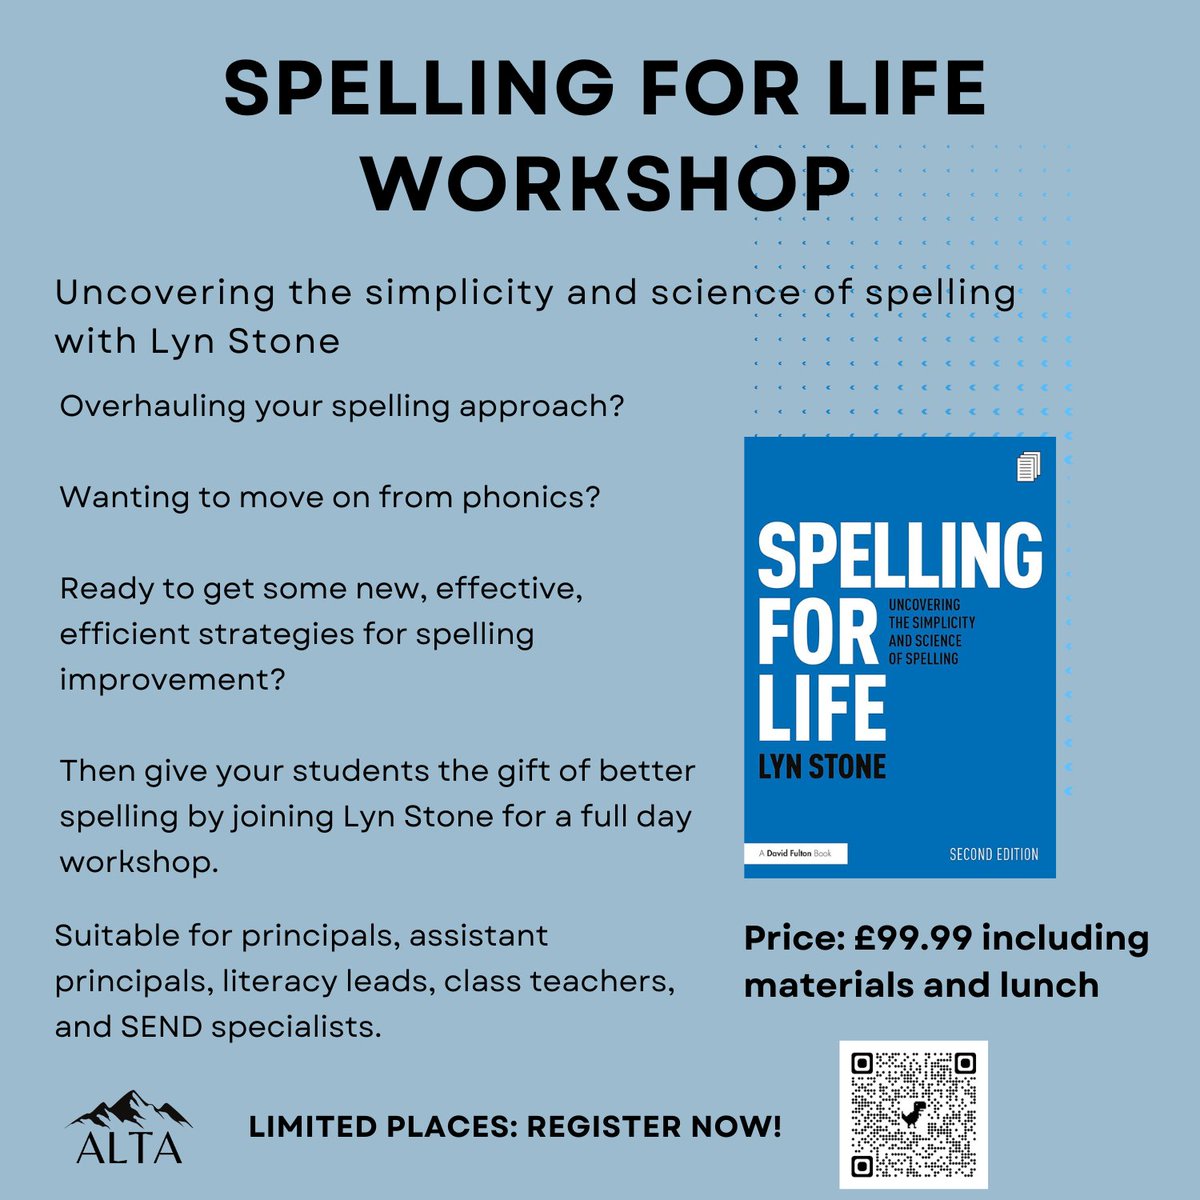 @lifelonglit is coming to England on May 23rd for the CPD event of the year. Will you be joining us? Don't miss out on 👨‍💼 Actionable advice ✍️ Effective strategies 🏫 Suitable for all phases Get your tickets here eventbrite.co.uk/e/spelling-for… Group discounts available on request.